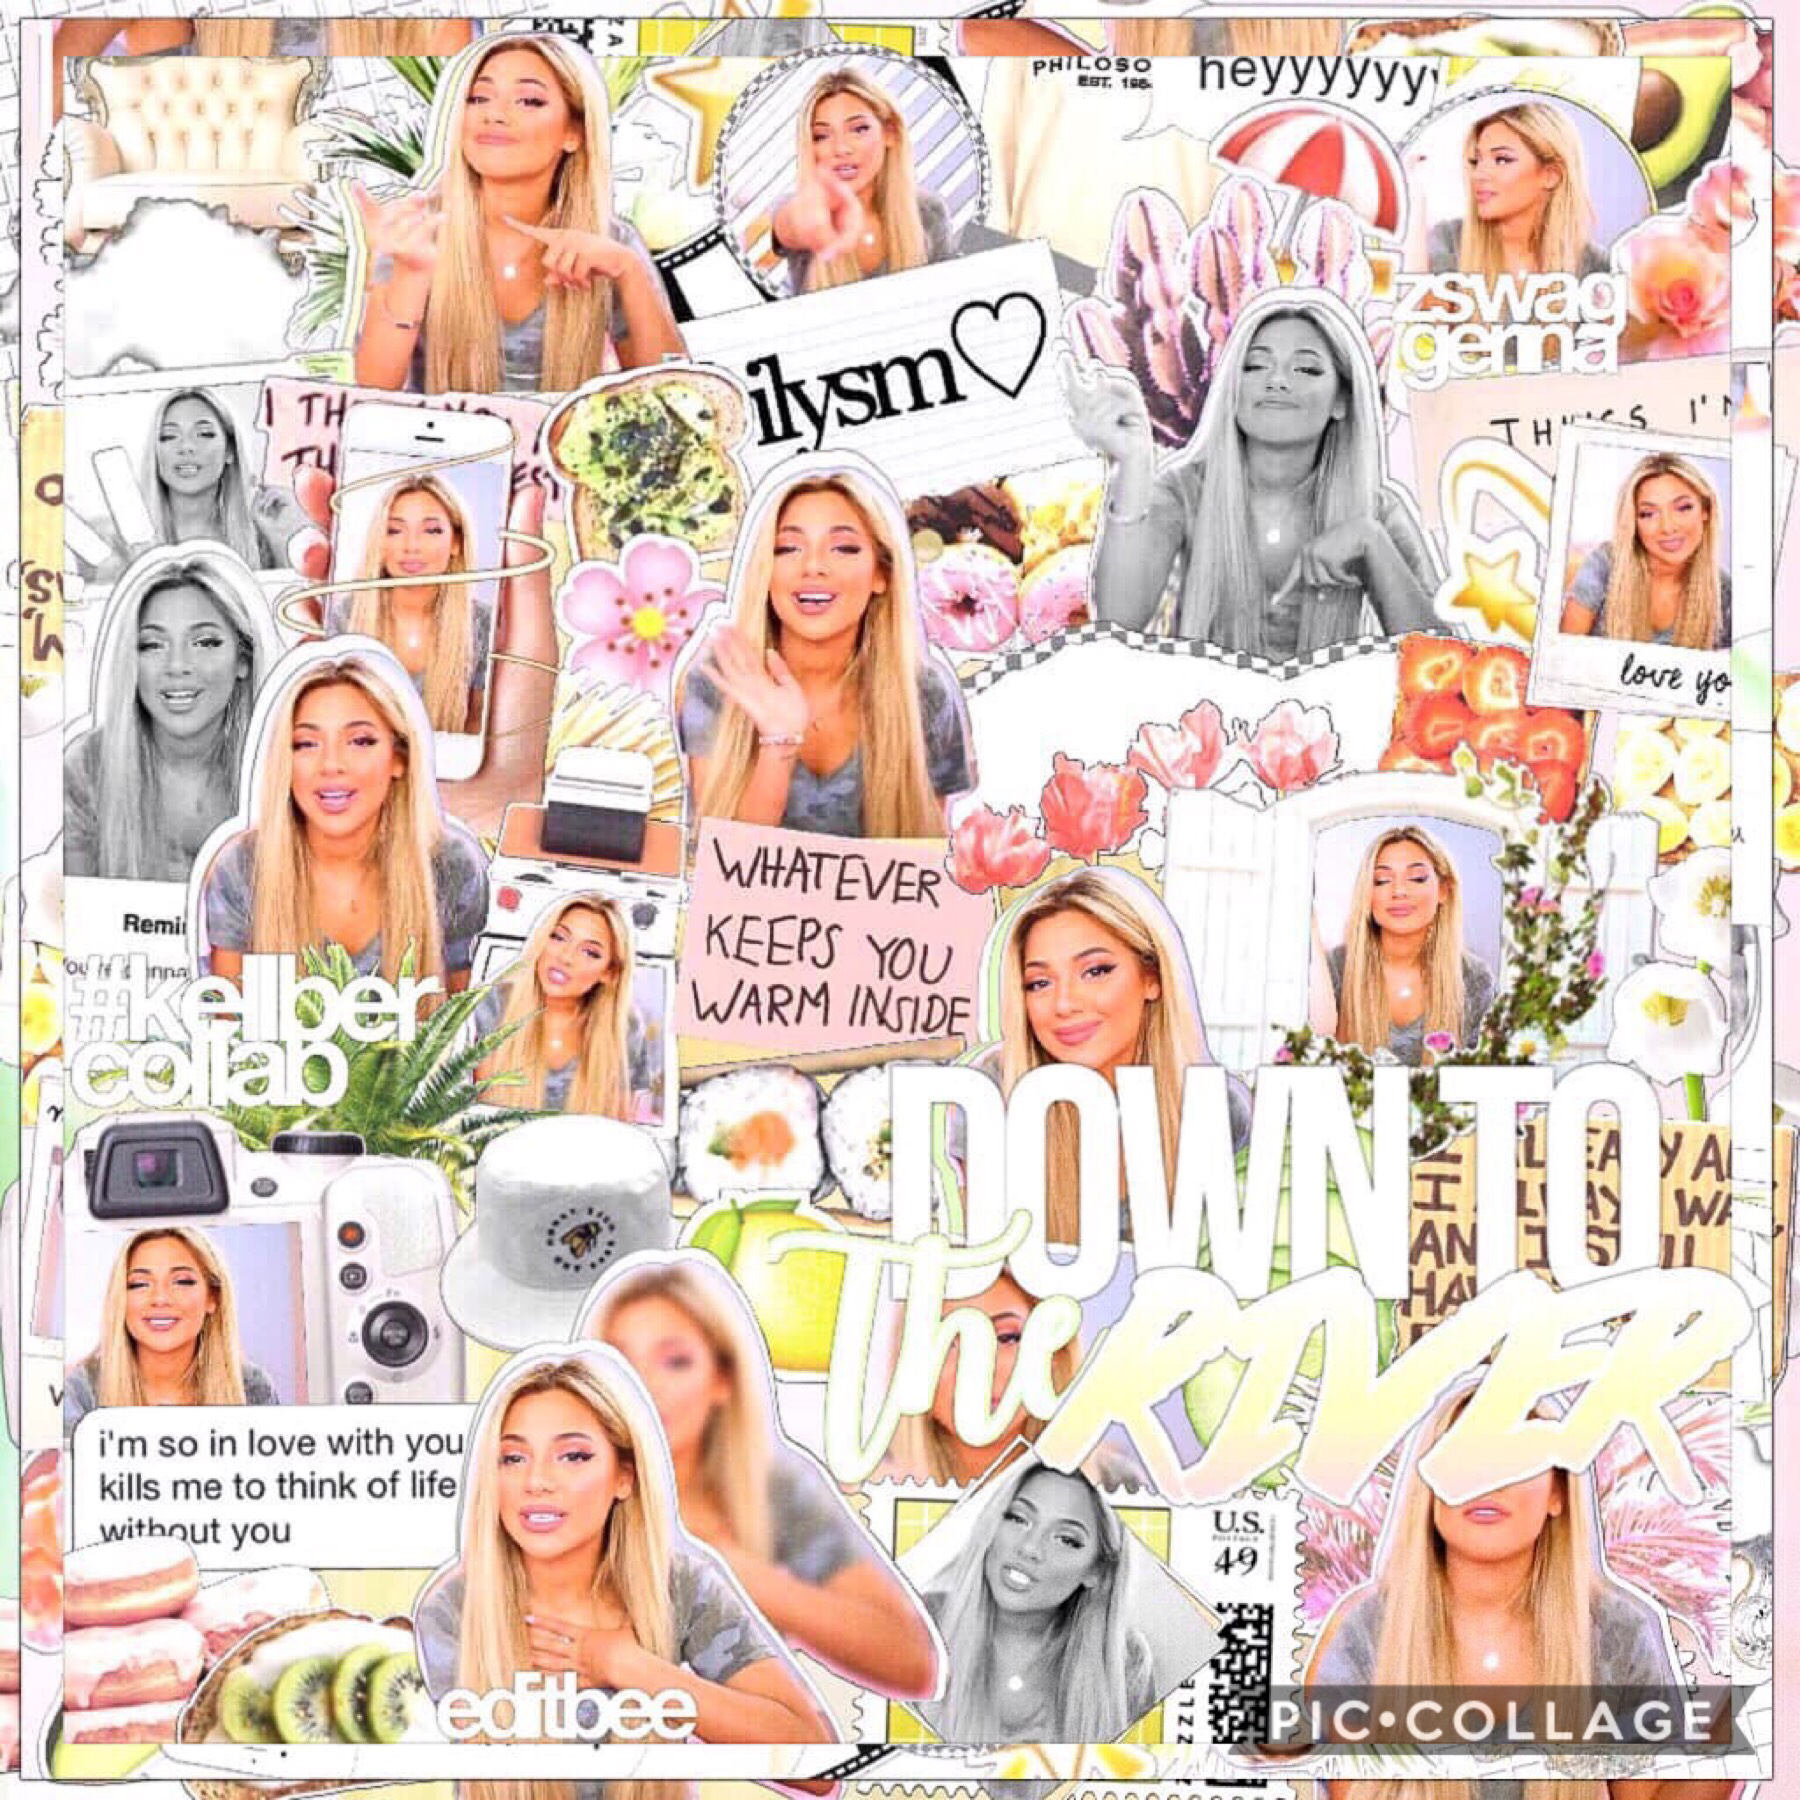 collab with my best friend amber @editbee 💗💛 #kellber 😚 this is my favorite so far I love it so much !!🌤